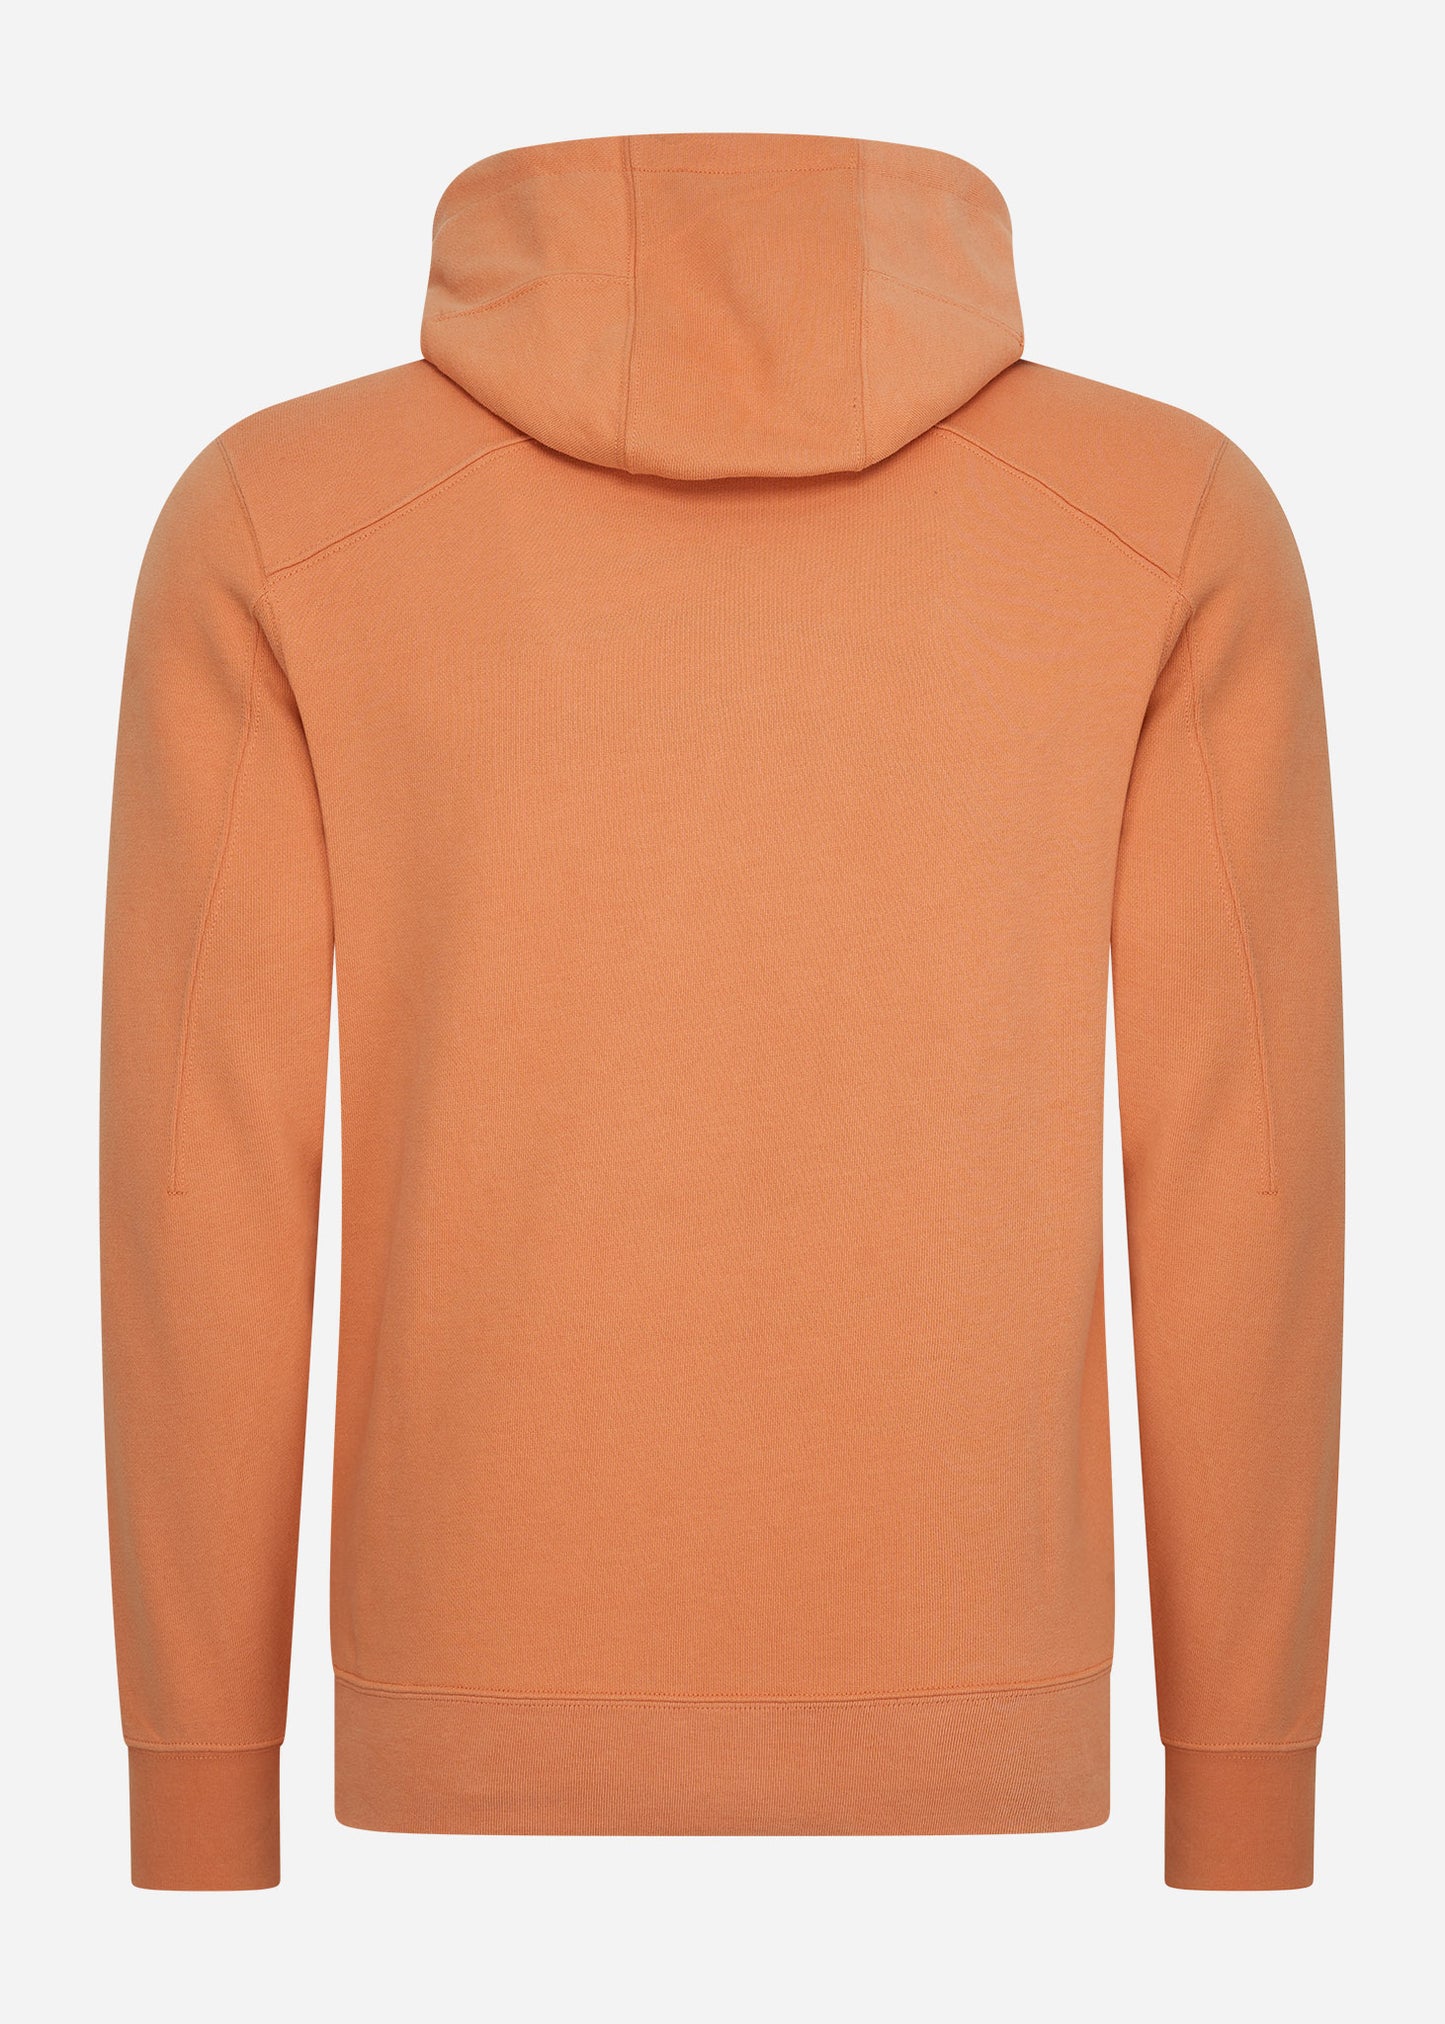 Core overhead hoody - coral gold